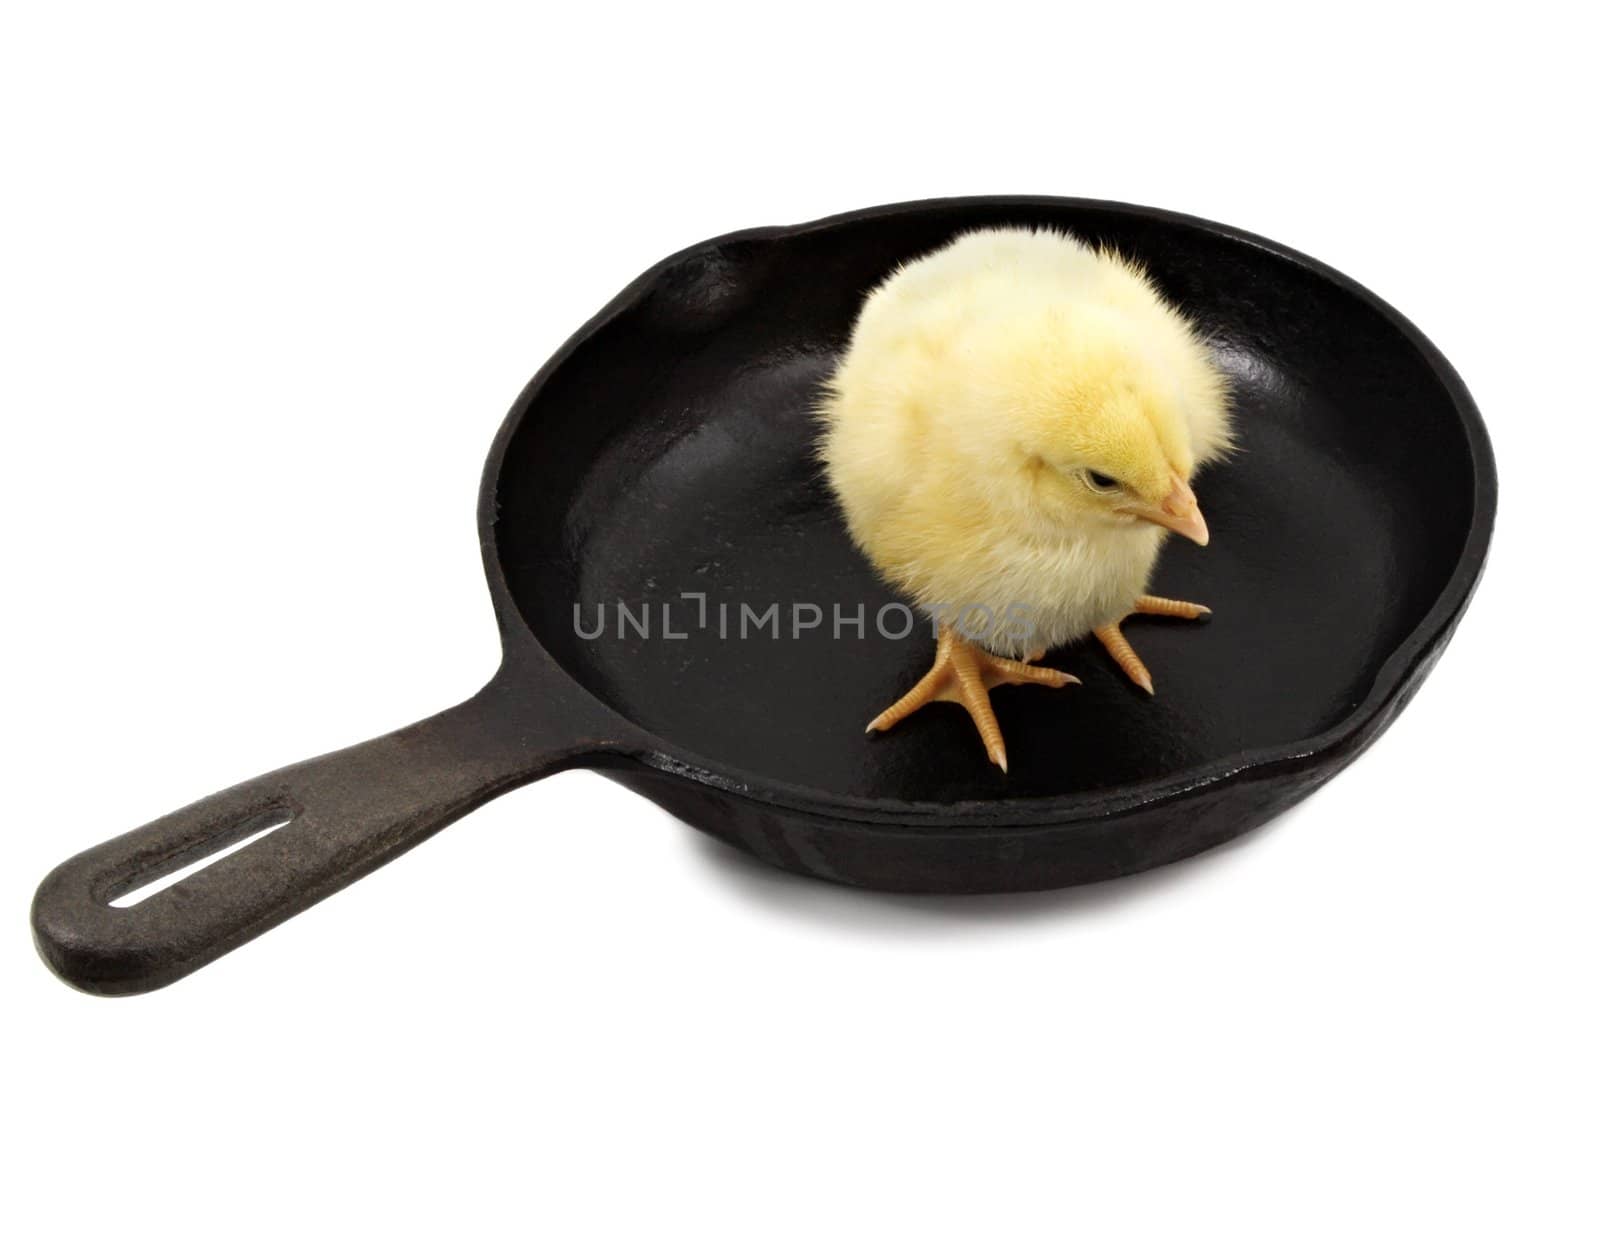 chick on a cast iron pan by lanalanglois